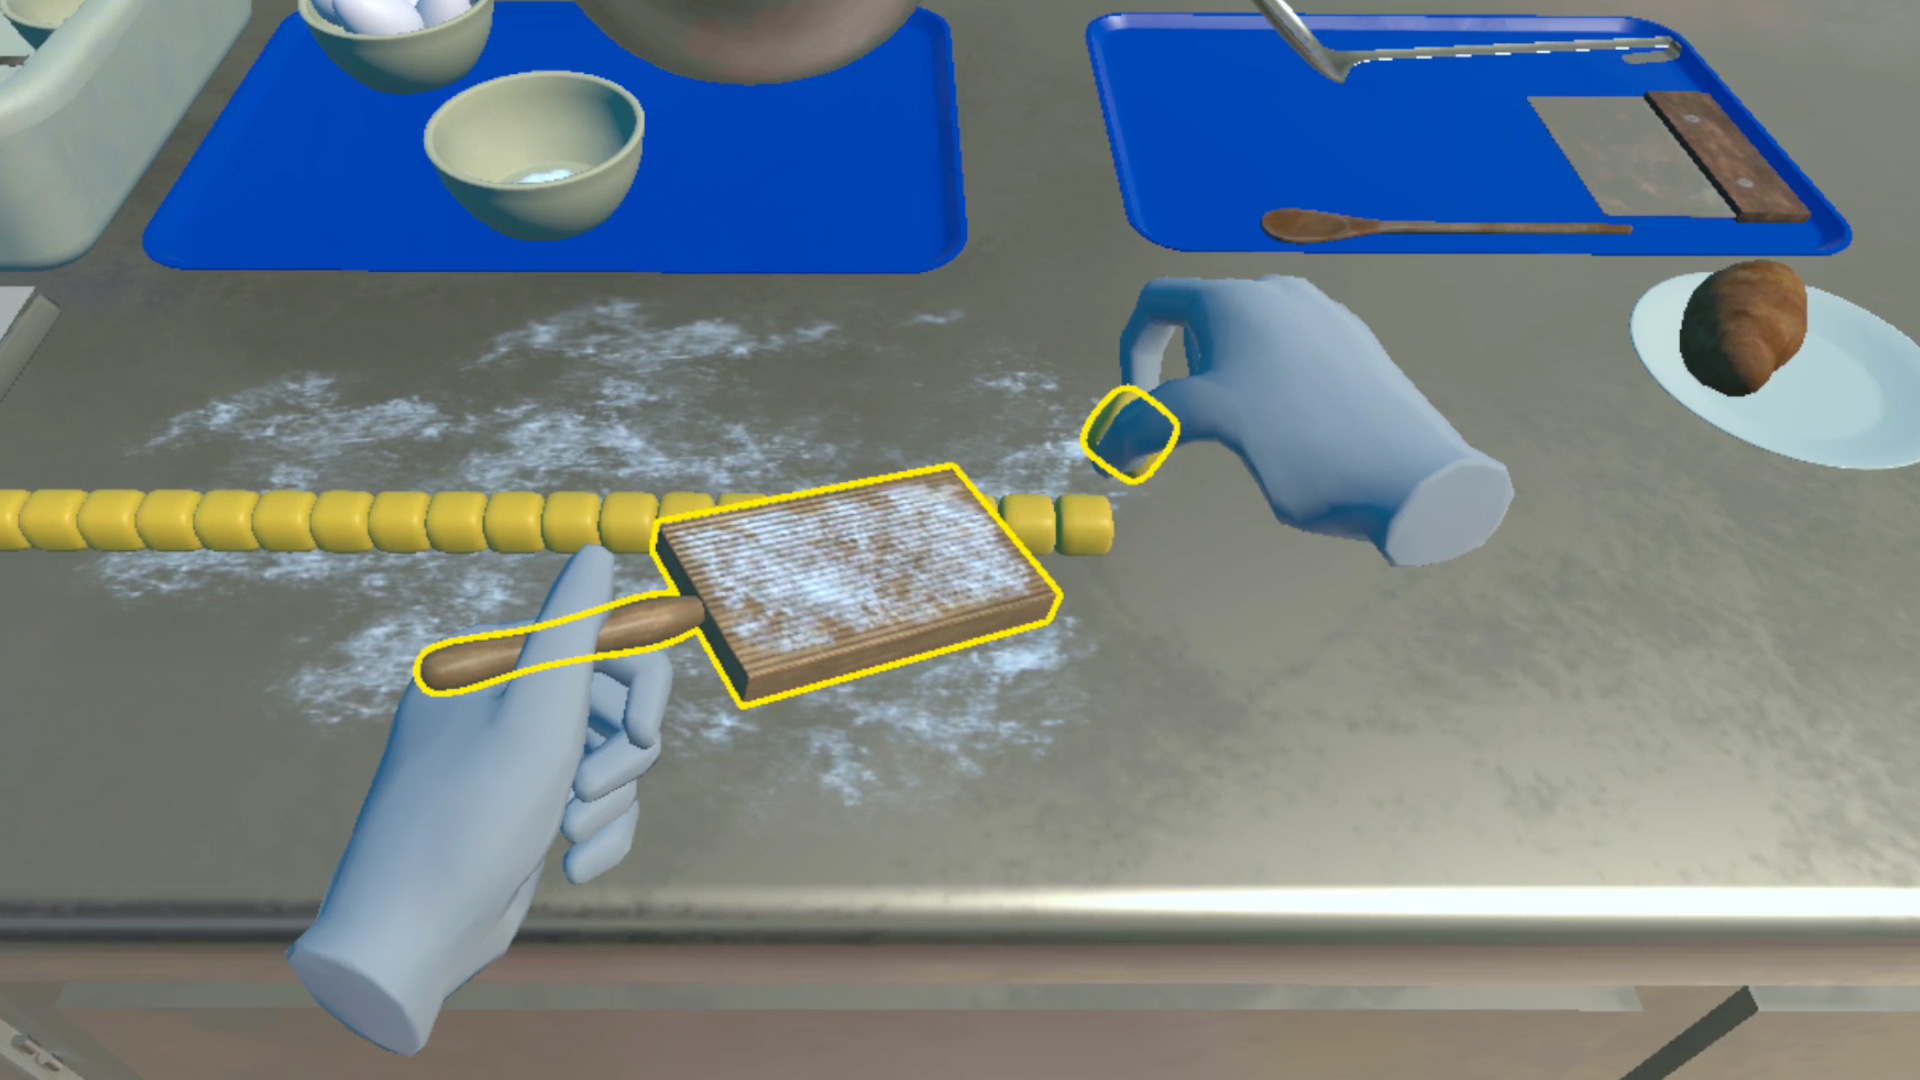 A screengrab of the VR Cooking Training showing the user putting gnocchi dough on to the gnocchi board